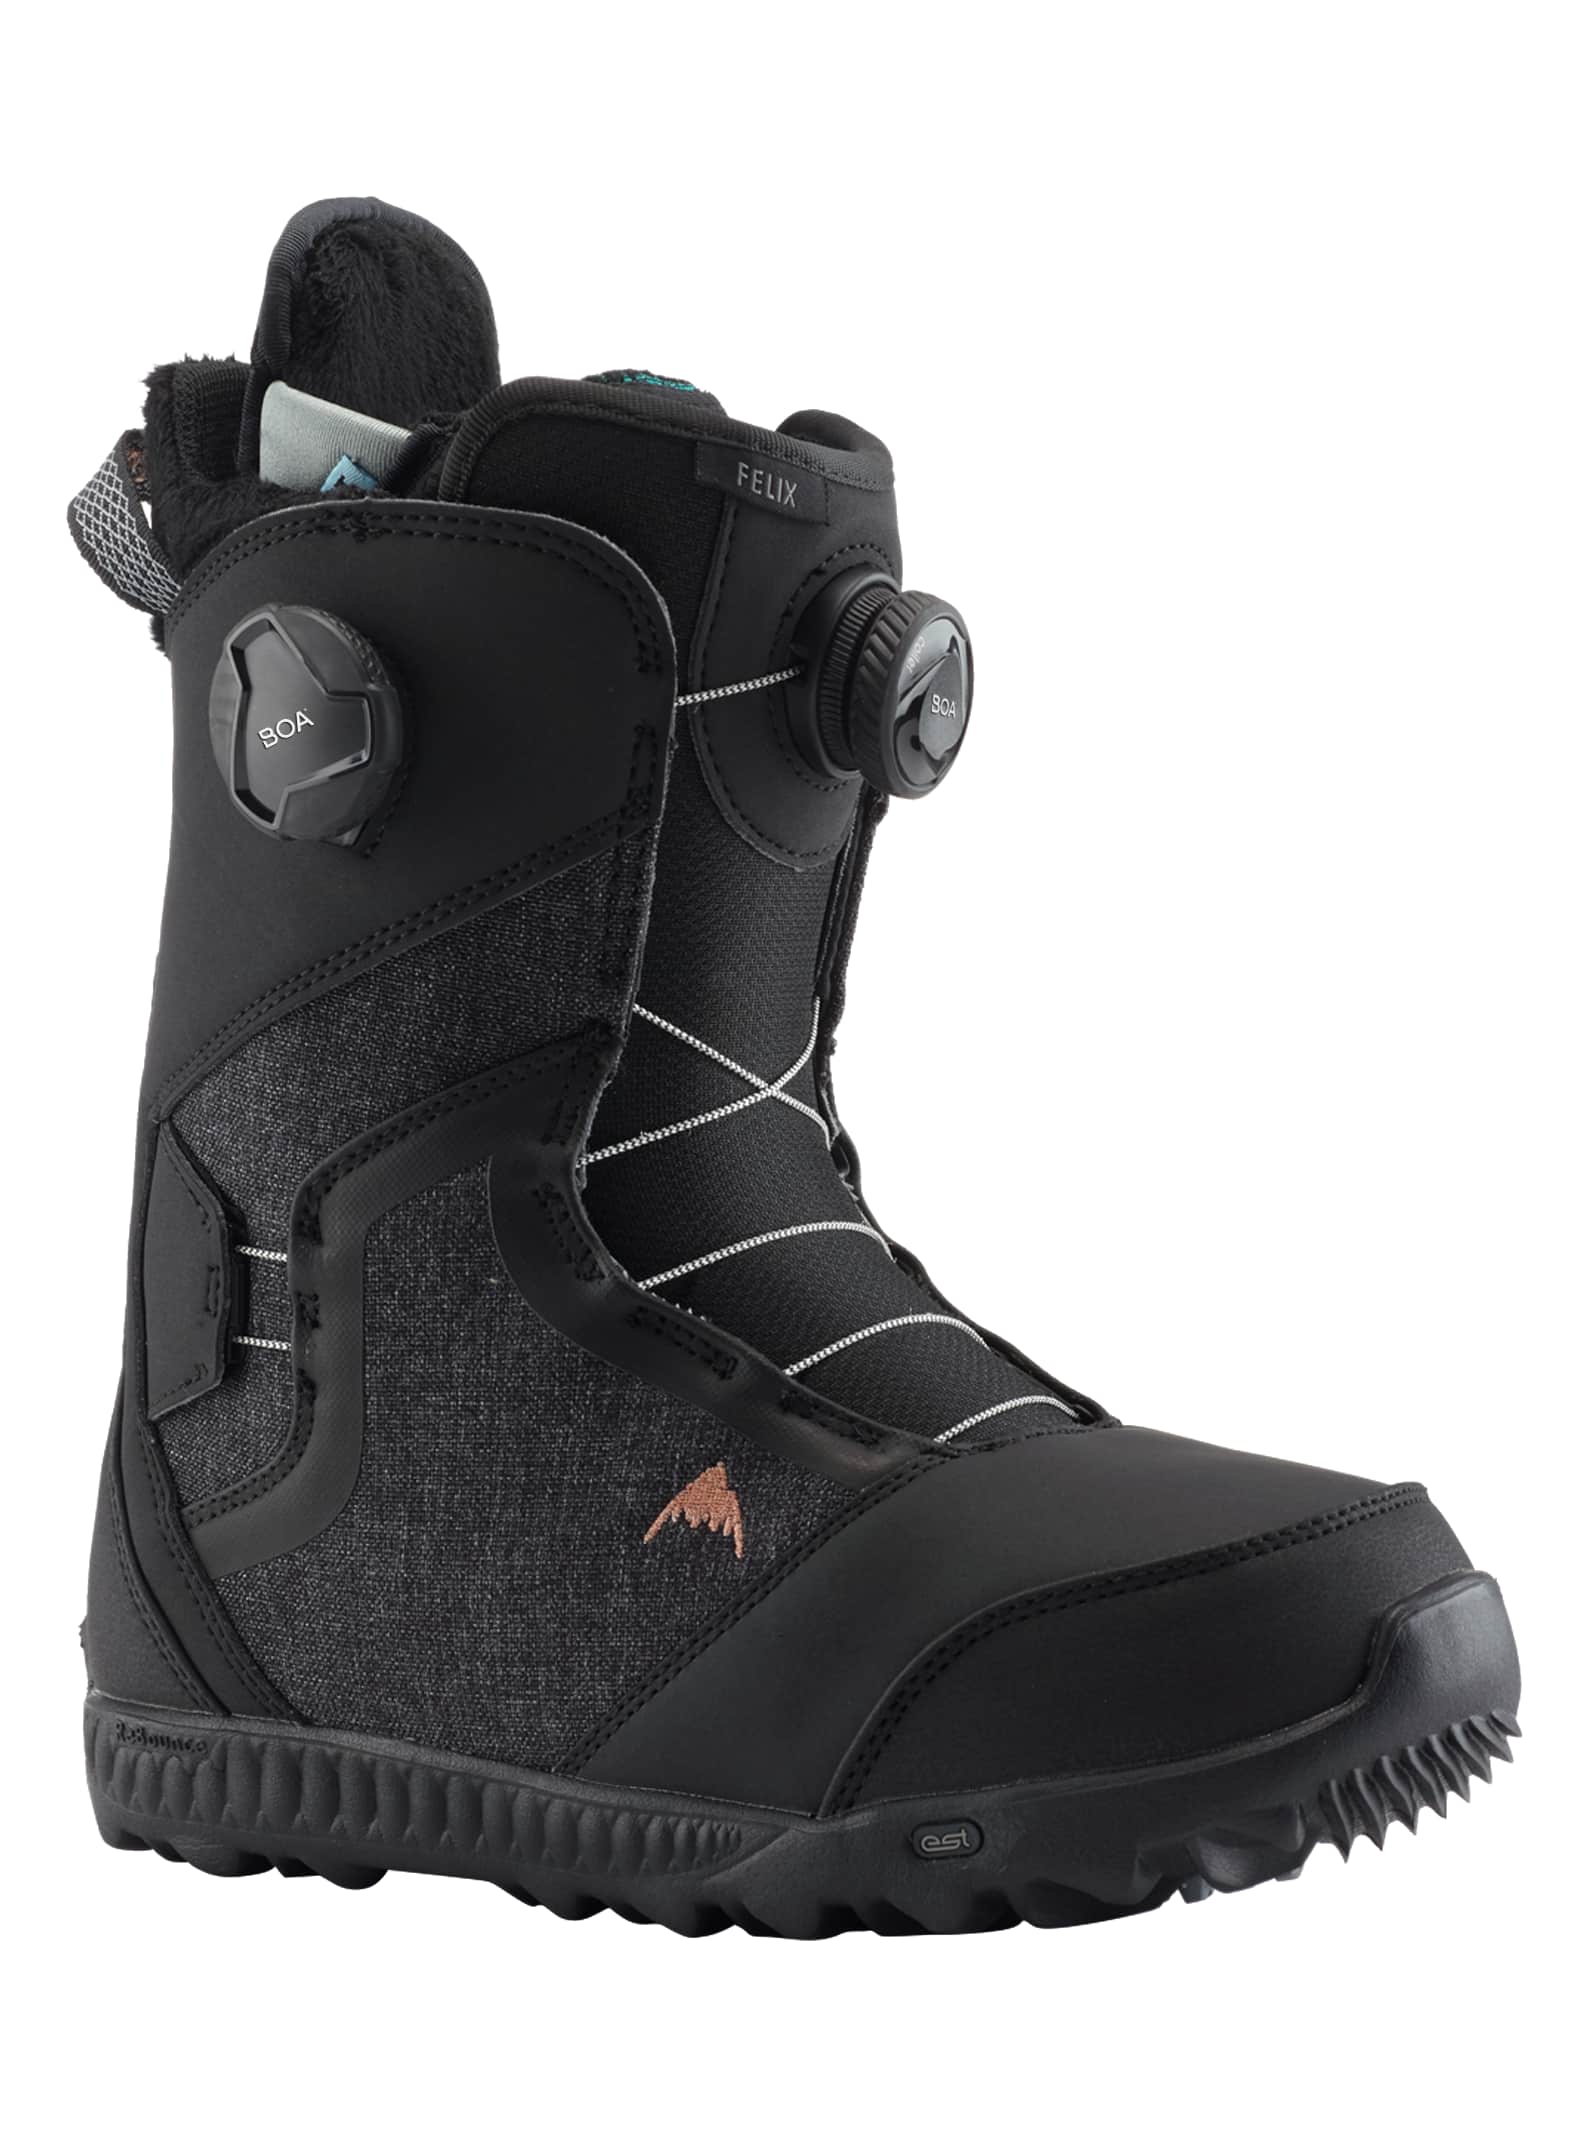 womens snowboard boots canada